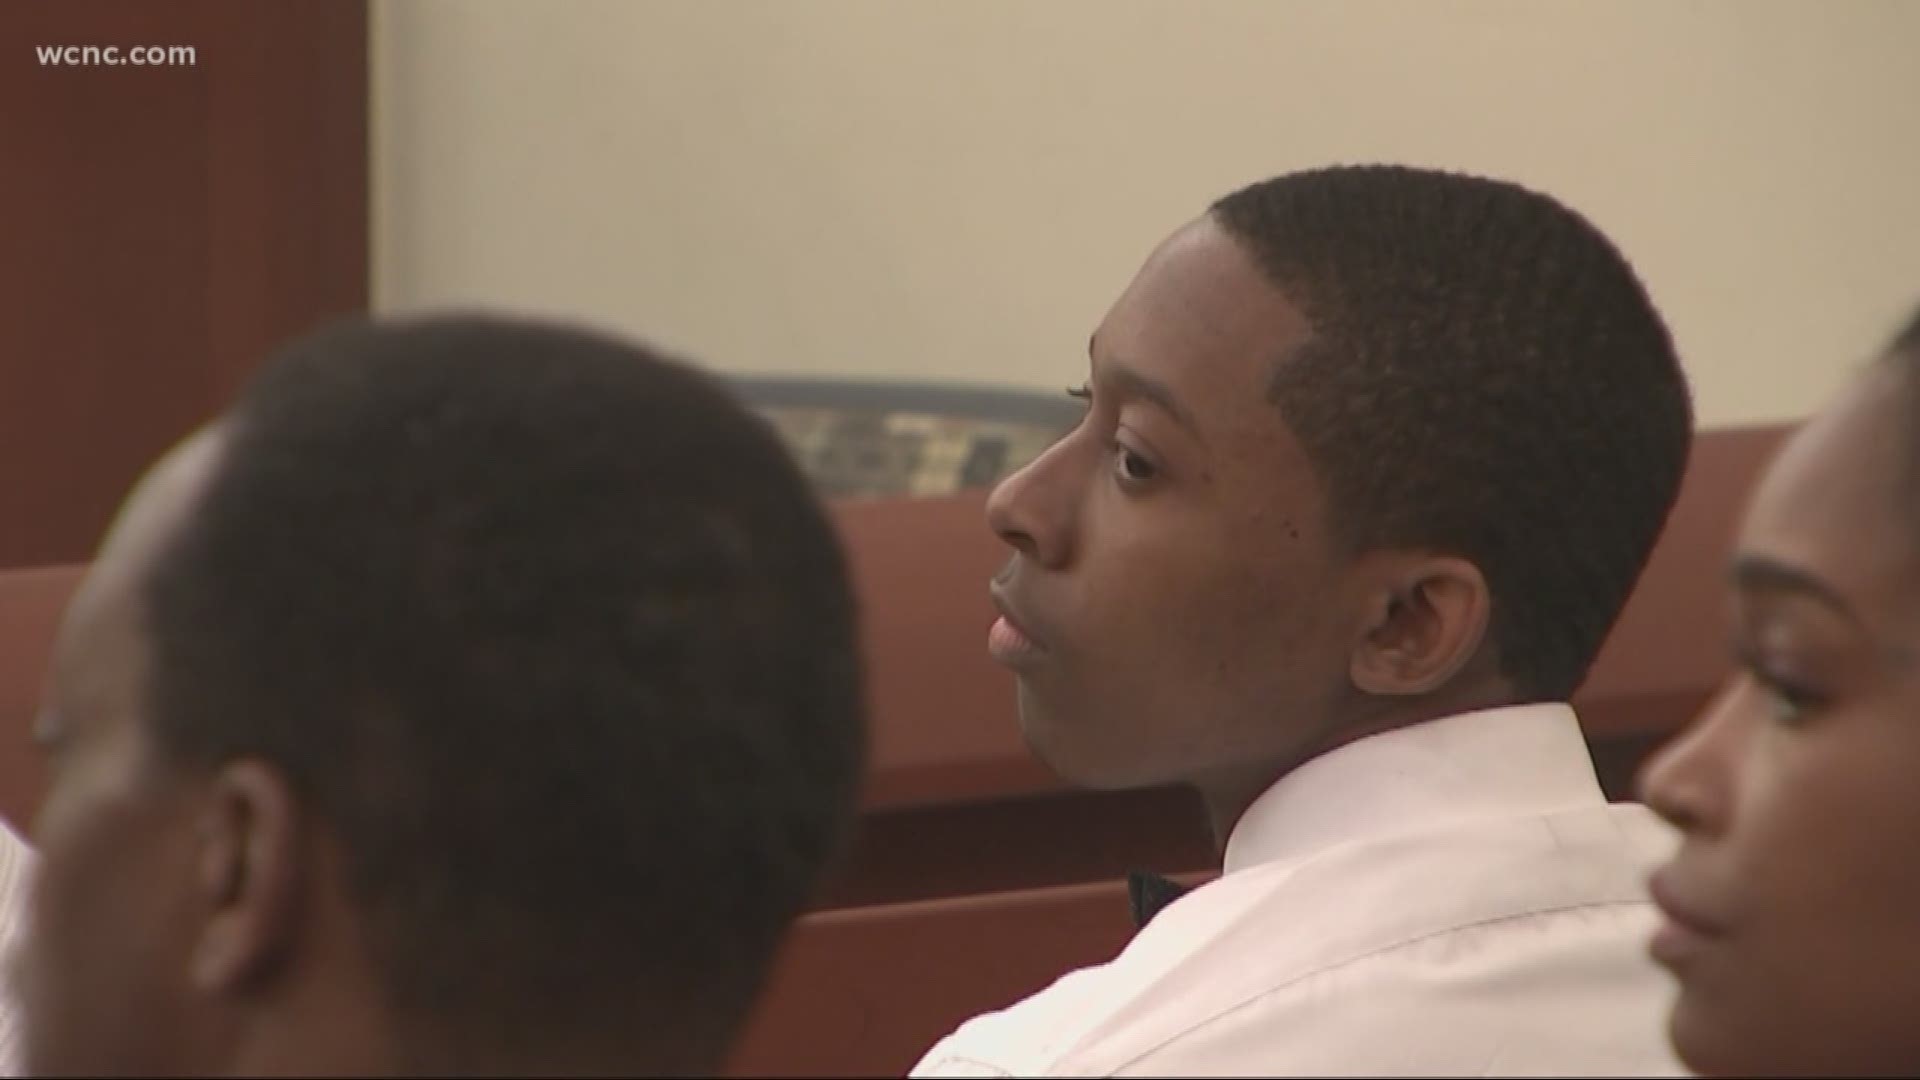 A judge sentenced Jatwan Cuffie to six to nine years in prison after he shot and killed his classmate, Bobby McKeithen, inside Butler High School.